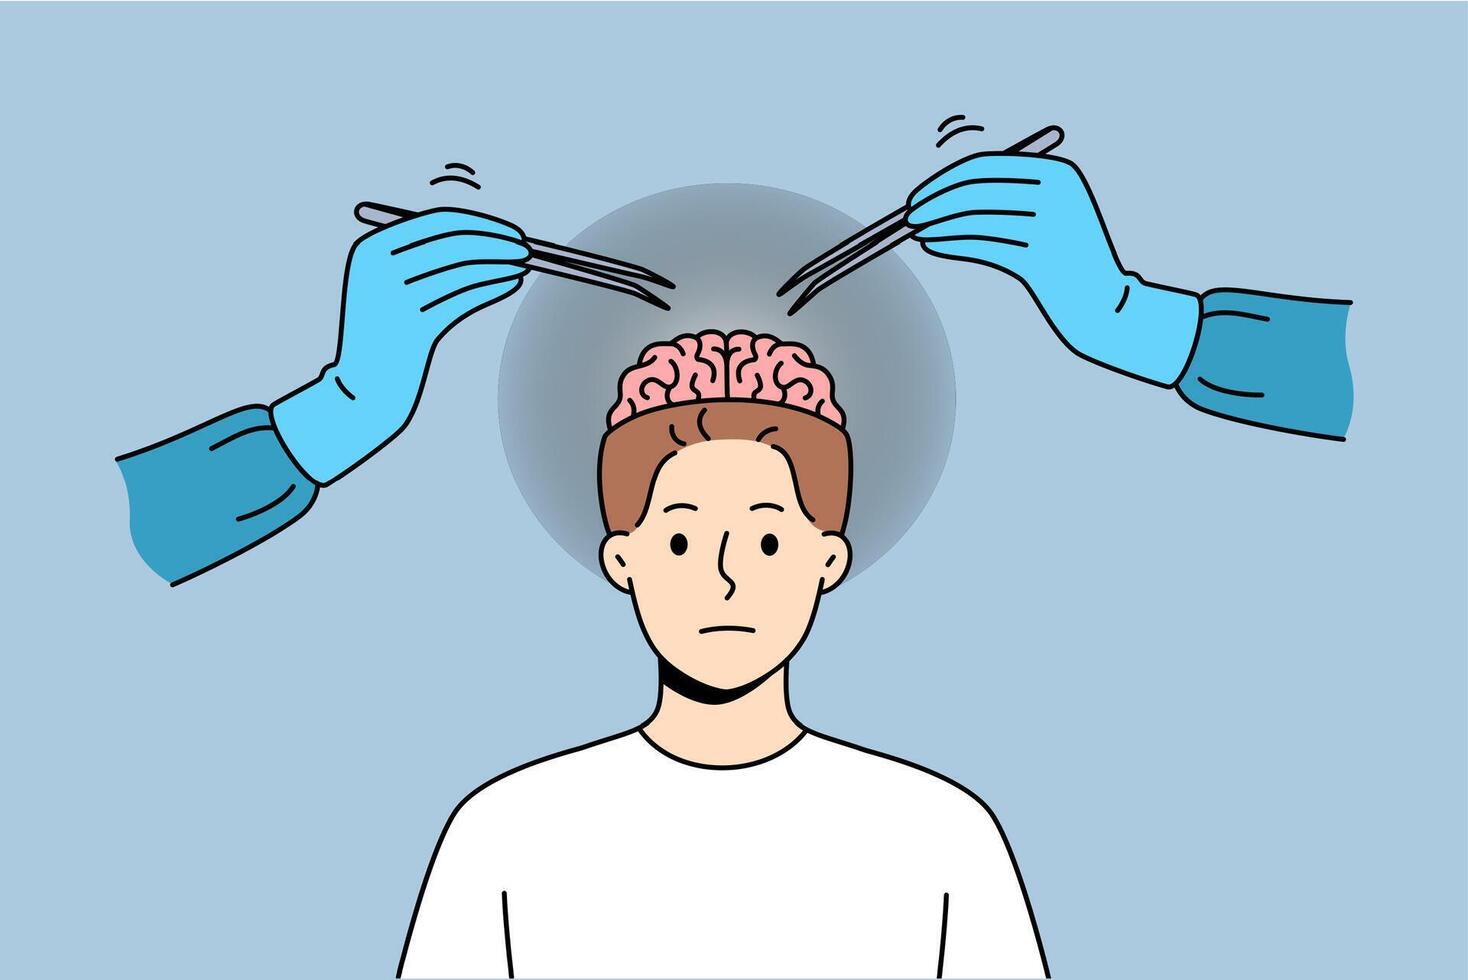 Neurosurgical operation on brain man looking at camera, standing near doctors hands with tweezers vector